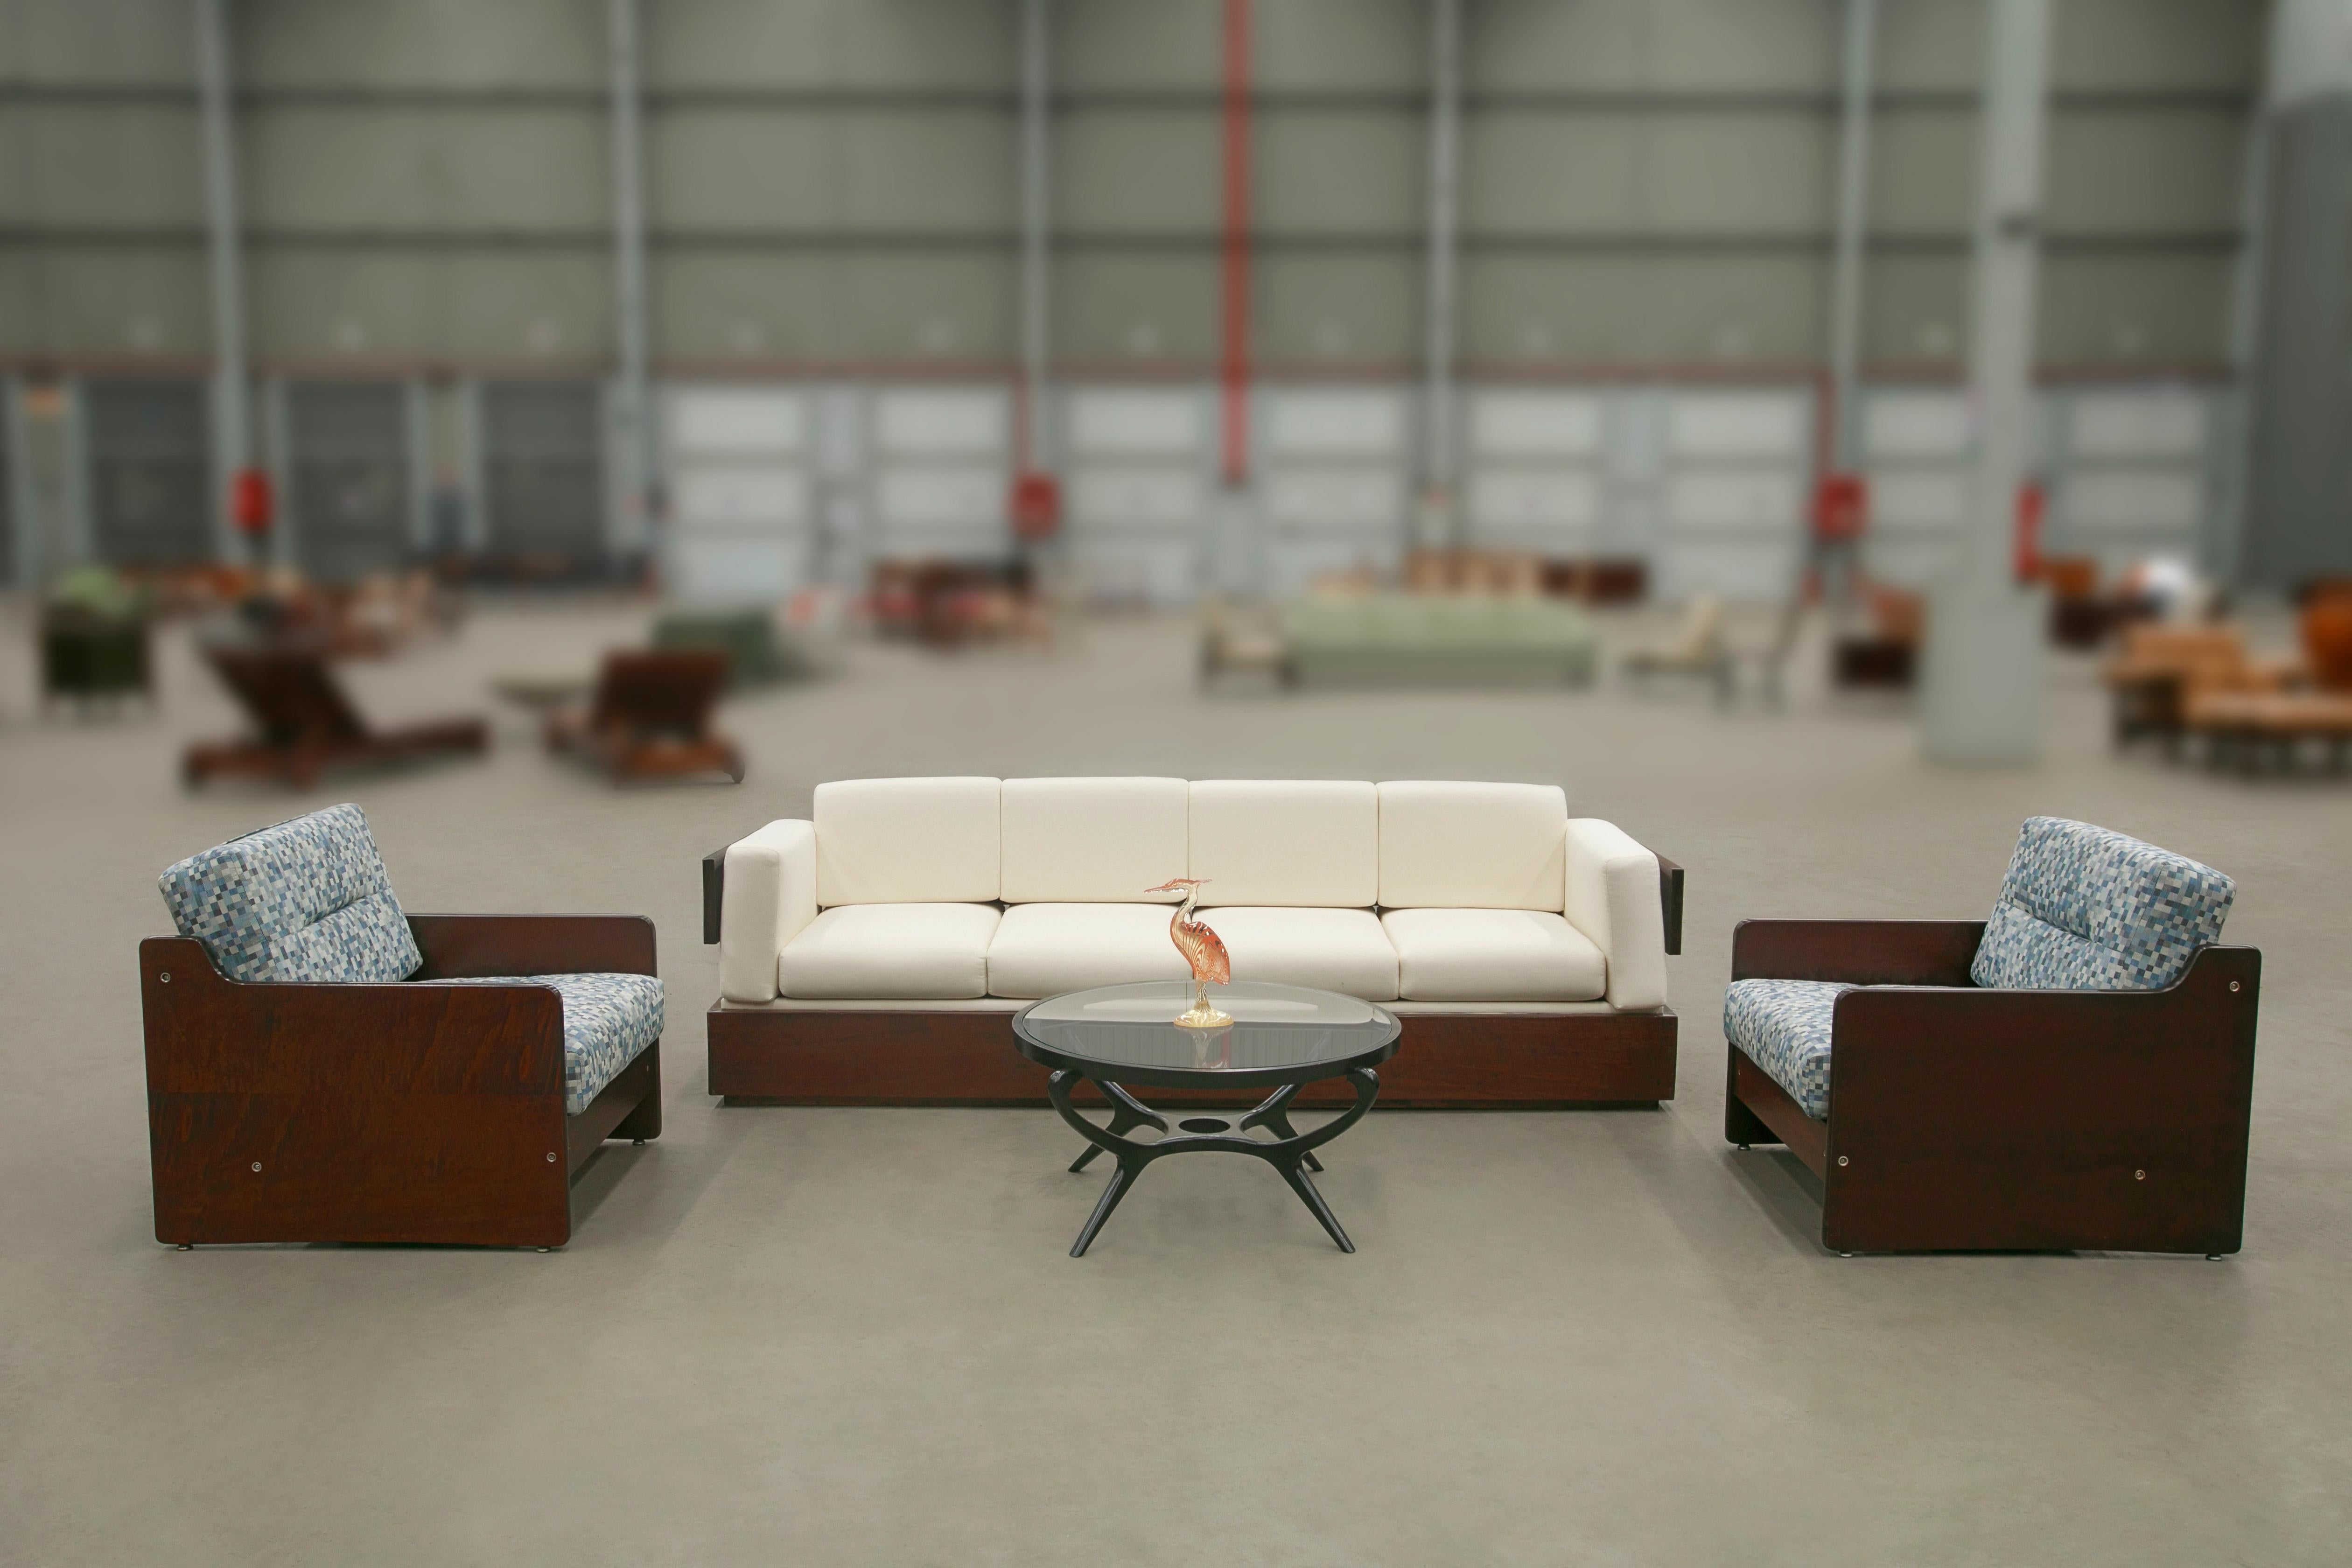 Fabric Brazilian Modern Sofa in Hardwood and White Linen by Celina, Brazil, c. 1960 For Sale